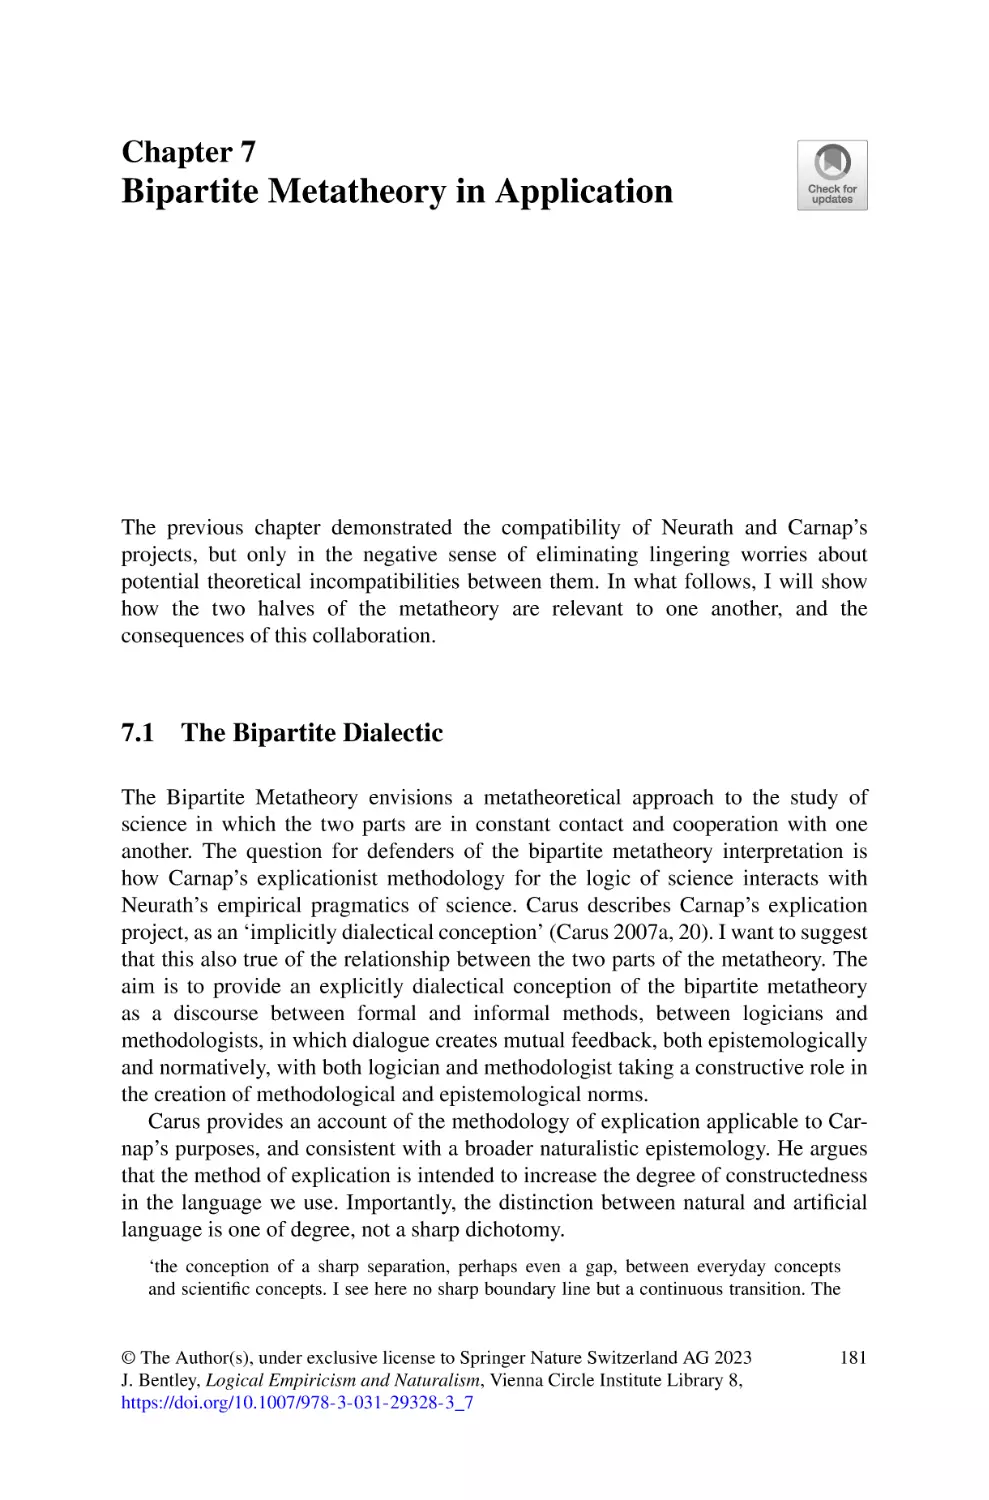 7 Bipartite Metatheory in Application
7.1 The Bipartite Dialectic